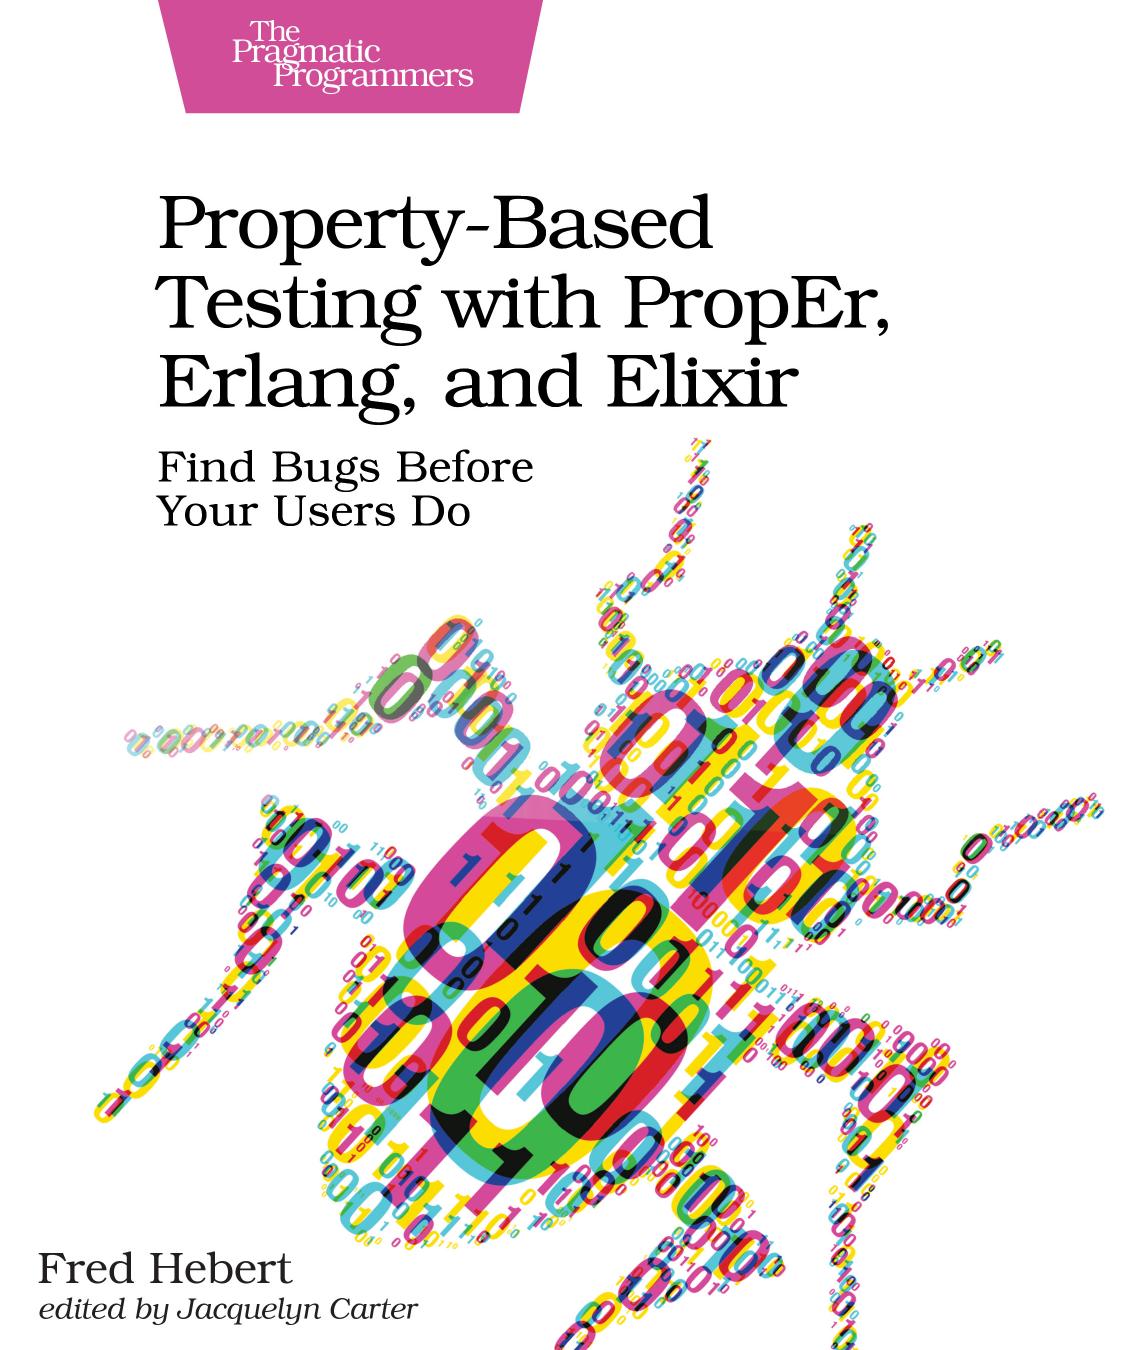 Property-Based Testing with PropEr, Erlang, and Elixir by Fred Hebert